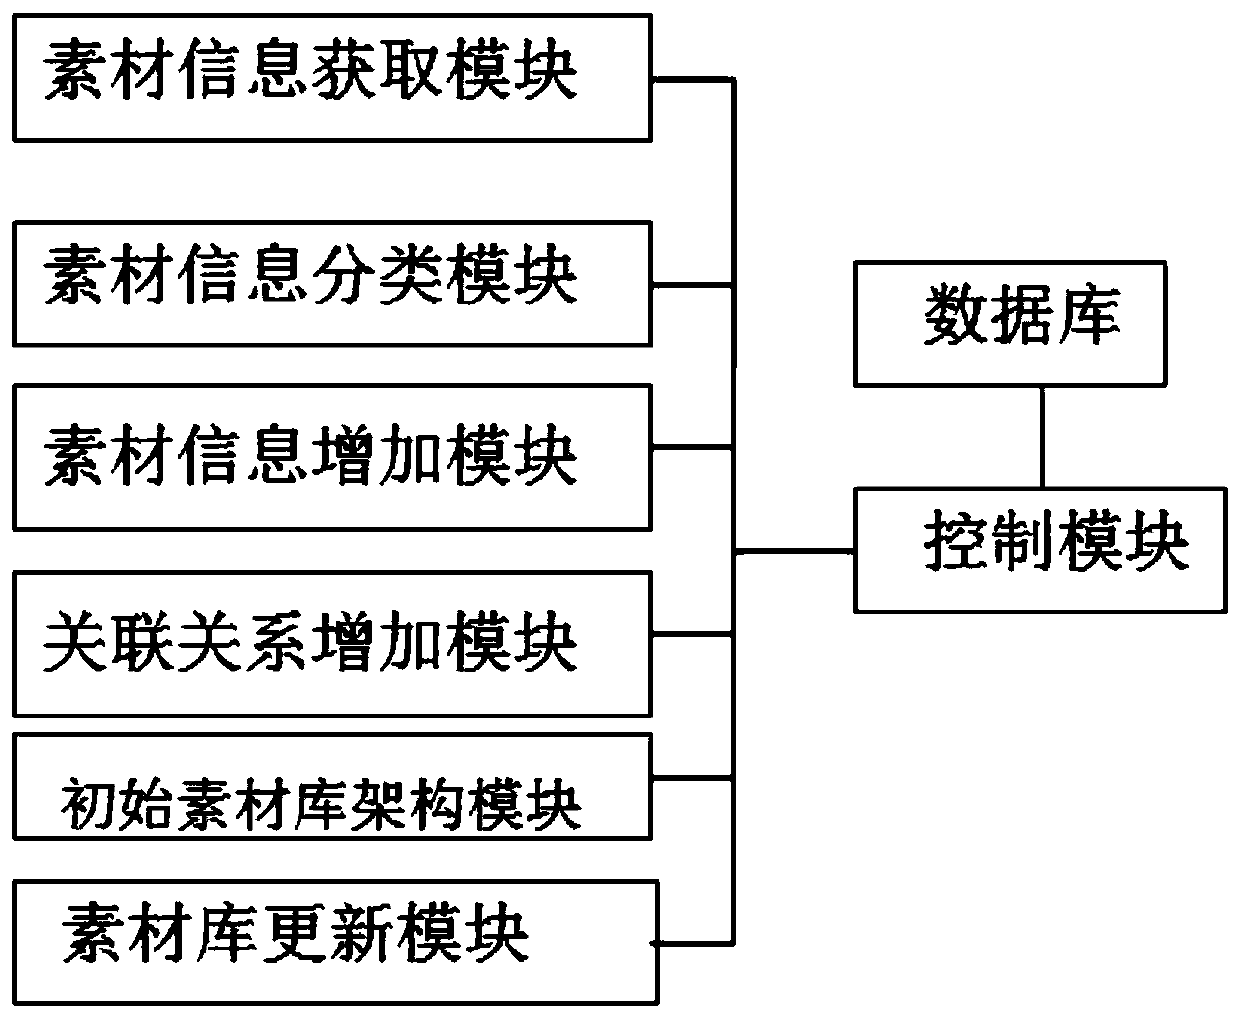 Public material library establishing system and method